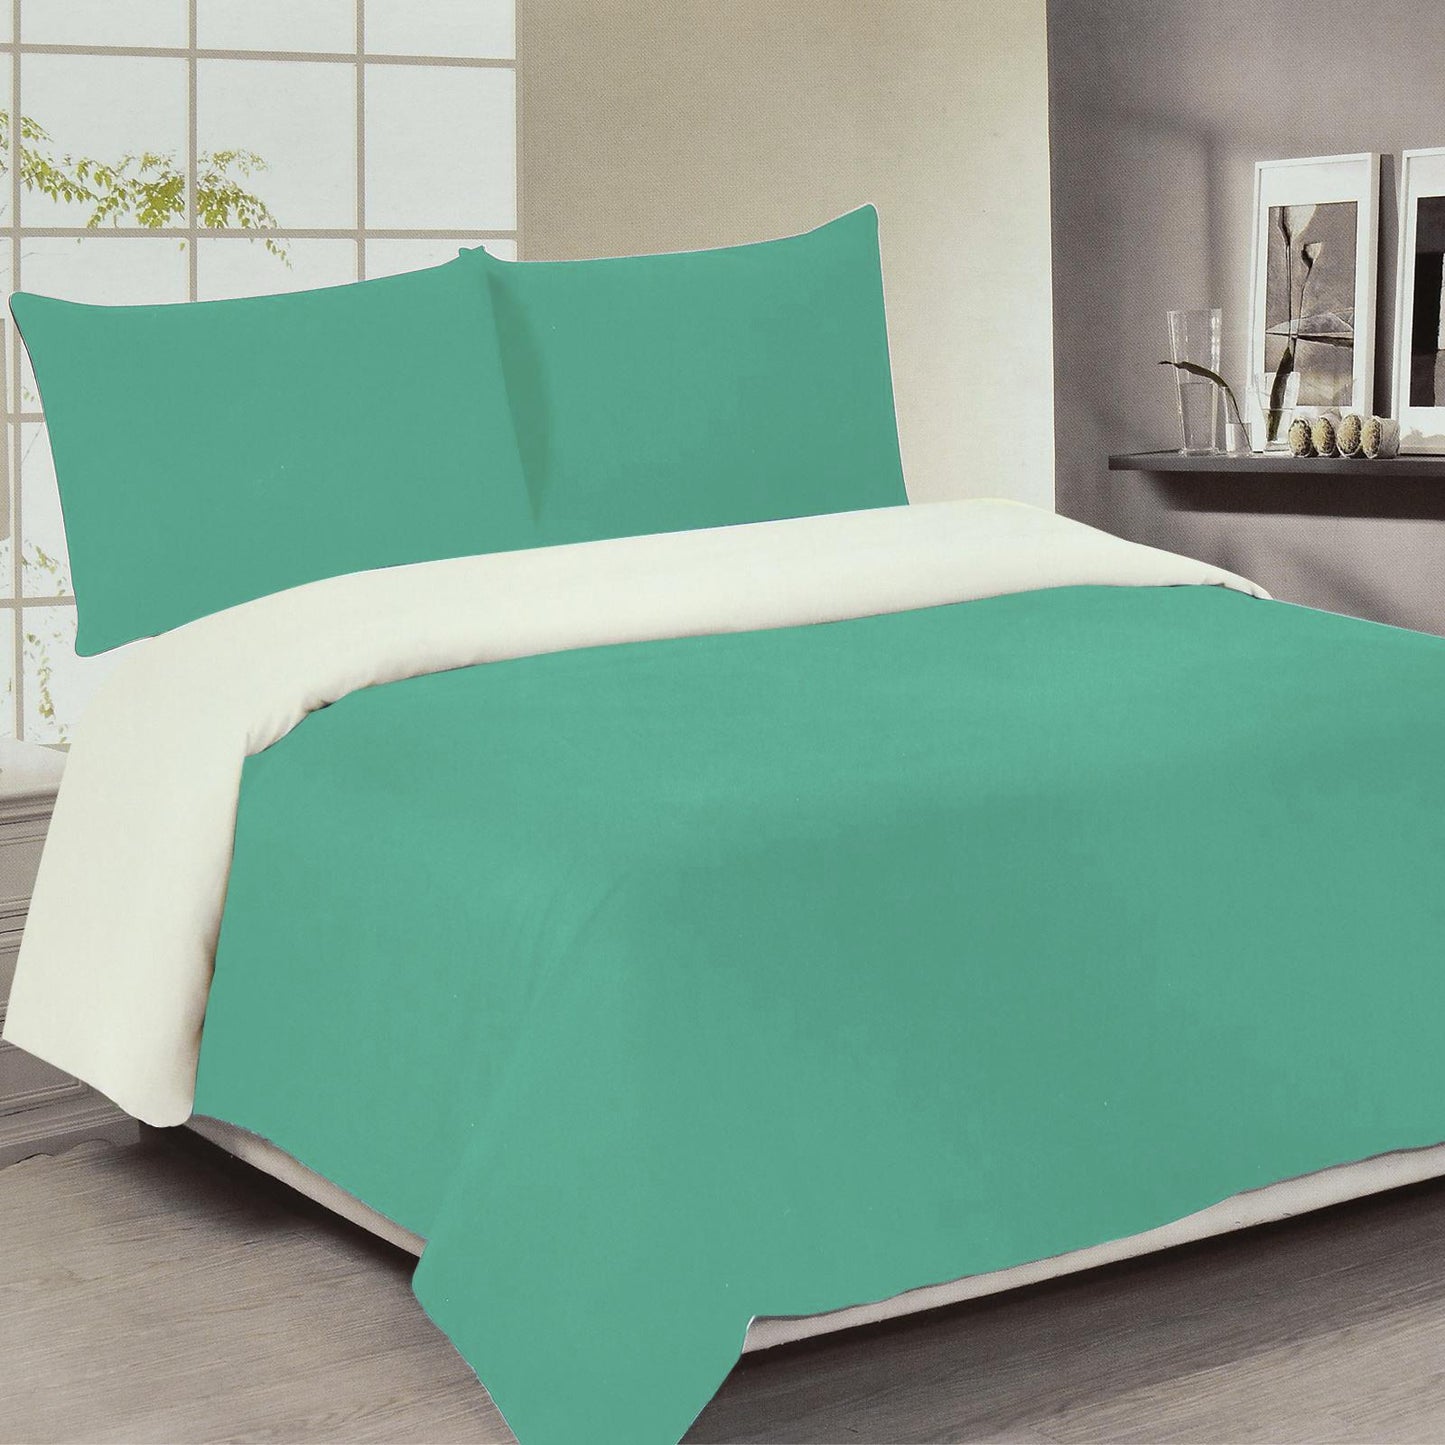 Switch Up Your Bedding Style with a Reversible Duvet Set